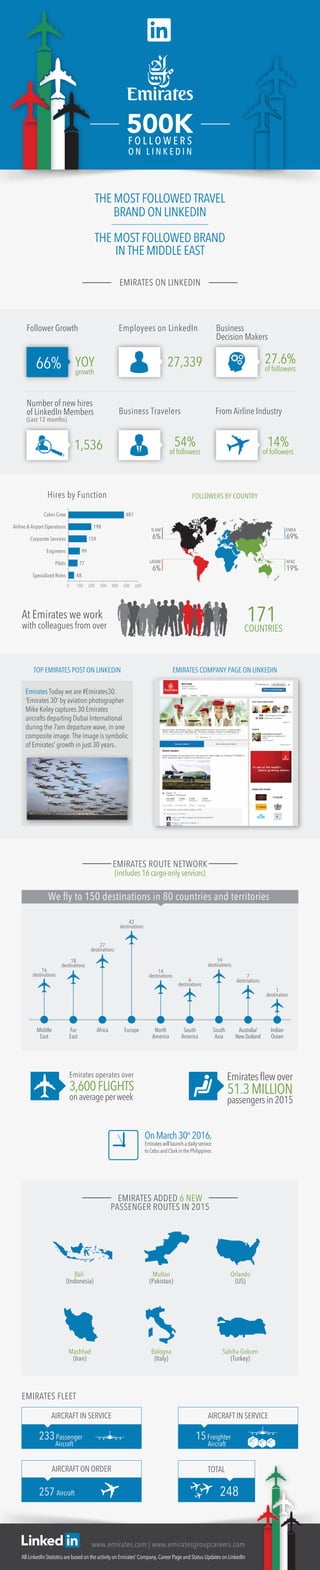 EMIRATES ON LINKEDIN
THE MOST FOLLOWED TRAVEL
BRAND ON LINKEDIN
THE MOST FOLLOWED BRAND
IN THE MIDDLE EAST
AllLinkedInStatisticsarebasedontheactivityonEmirates’Company,CareerPageandStatusUpdatesonLinkedIn
www.emirates.com | www.emiratesgroupcareers.com
Bali
(Indonesia)
EMIRATES ROUTE NETWORK
(includes 16 cargo-only services)
EMIRATES ADDED 6 NEW
PASSENGER ROUTES IN 2015
Middle
East
Far
East
Africa Europe North
America
South
America
South
Asia
Indian
Ocean
Australia/
NewZealand
16
destinations
18
destinations
27
destinations
42
destinations
14
destinations
19
destinations
6
destinations
7
destinations
1
destination
We ﬂy to 150 destinations in 80 countries and territories
Multan
(Pakistan)
Orlando
(US)
Mashhad
(Iran)
Bologna
(Italy)
Sabiha Gokcen
(Turkey)
171COUNTRIES
At Emirates we work
with colleagues from over
EMIRATES FLEET
233Passenger
Aircraft
AIRCRAFT IN SERVICE
15Freighter
Aircraft
AIRCRAFT IN SERVICE
248
TOTAL
257 Aircraft
AIRCRAFT ON ORDER
EMIRATES COMPANY PAGE ON LINKEDINTOP EMIRATES POST ON LINKEDIN
Emirates Today we are #Emirates30.
‘Emirates 30’ by aviation photographer
Mike Keley captures 30 Emirates
aircrafts departing Dubai International
during the 7am departure wave, in one
composite image. The image is symbolic
of Emirates’ growth in just 30 years..
FOLLOWERS BY COUNTRY
F O L L O W E R S
O N L I N K E D I N
500K
Hires by Function
Number of new hires
of LinkedIn Members
(Last 12 months)
1,536
YOY
growth
Follower Growth Employees on LinkedIn
27,339
From Airline Industry
14%
of followers
Business Travelers
54%
of followers
66% 27.6%
of followers
Business
Decision Makers
3,600FLIGHTS
onaverageperweek
EMEA
69%
APAC
19%
N.AM
6%
LATAM
6%
Specialized Roles 48
Airline & Airport Operations 198
481
6005004003002001000
Cabin Crew
Corporate Services 159
Engineers 99
Pilots 77
 